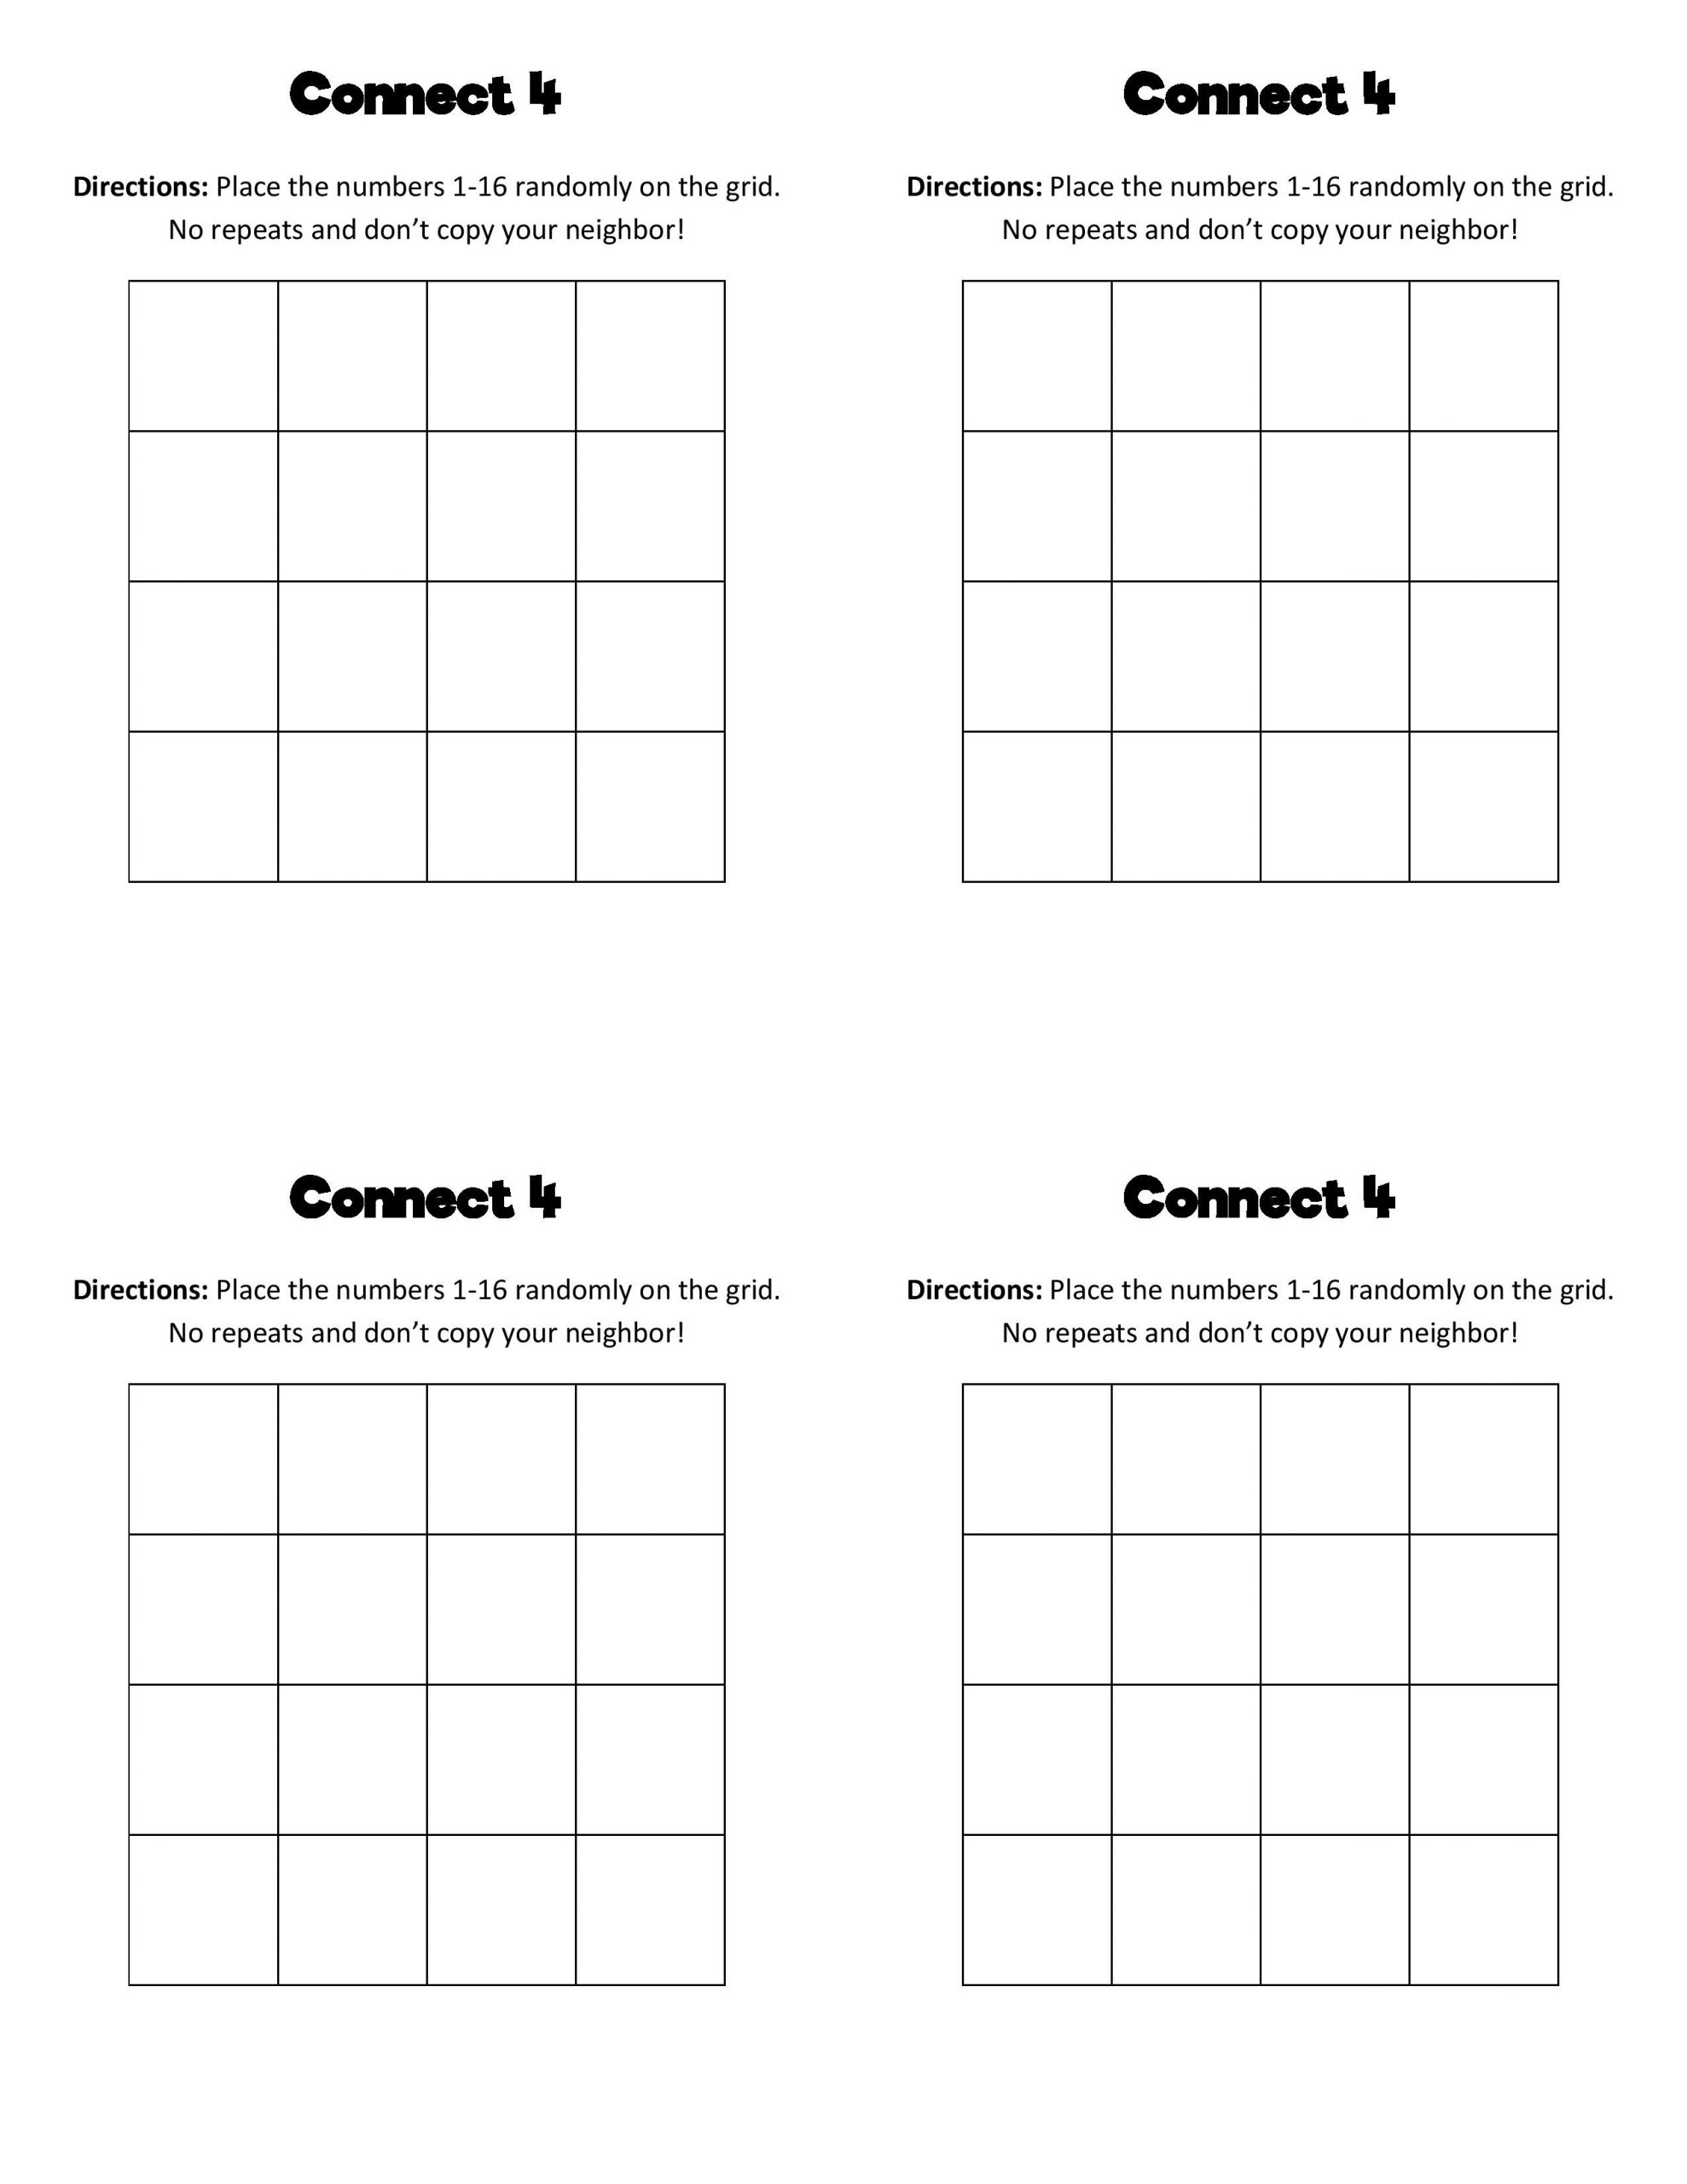 Solve Literal Equations Worksheet solving Literal Equations “connect 4” Activity Student